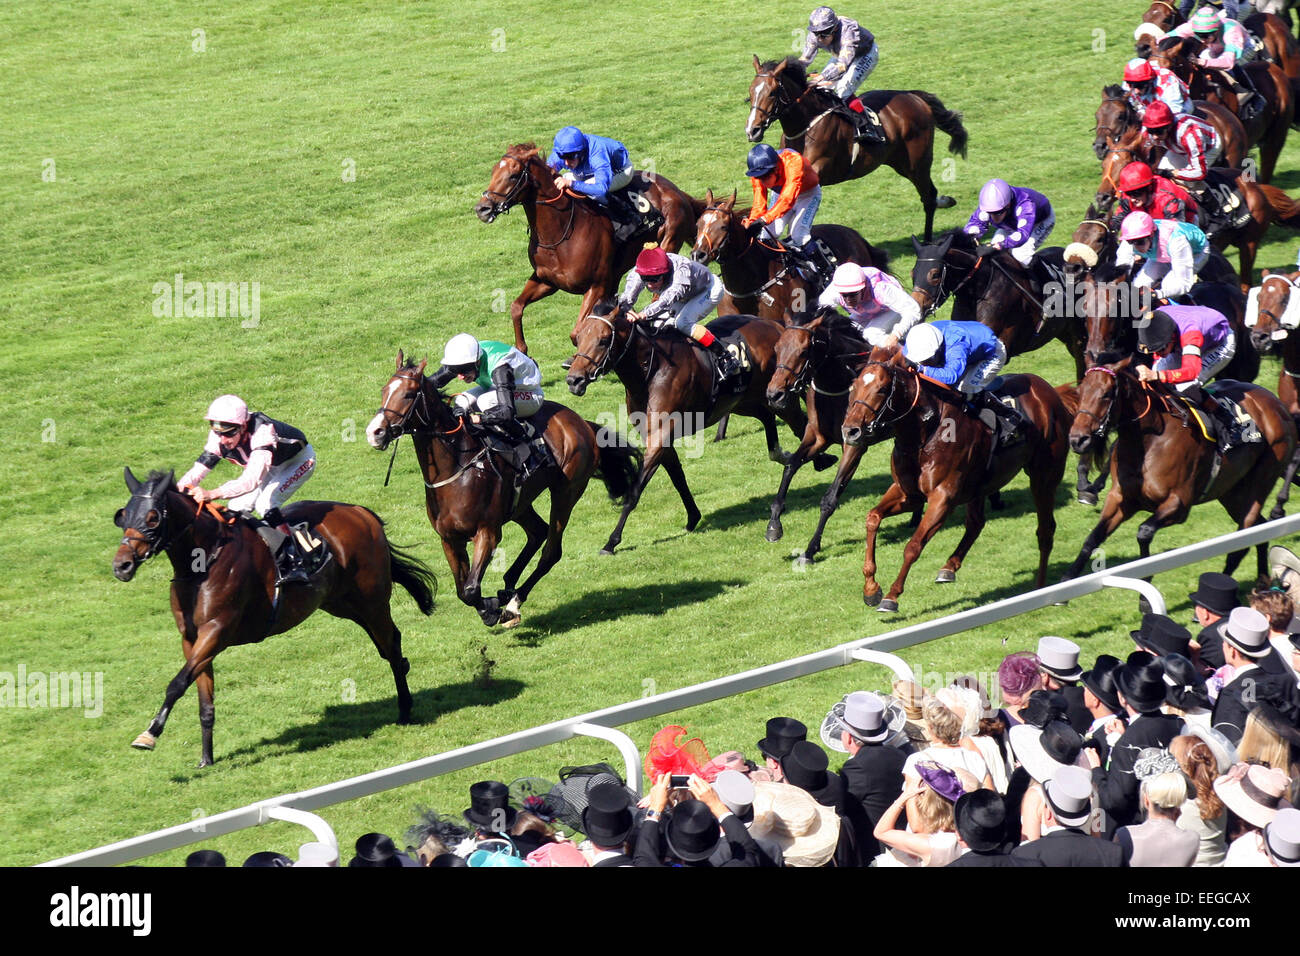 Royal Ascot, Winners presentation. The Fugue with William Buick up wins the Prince of Wales's Stakes Stock Photo